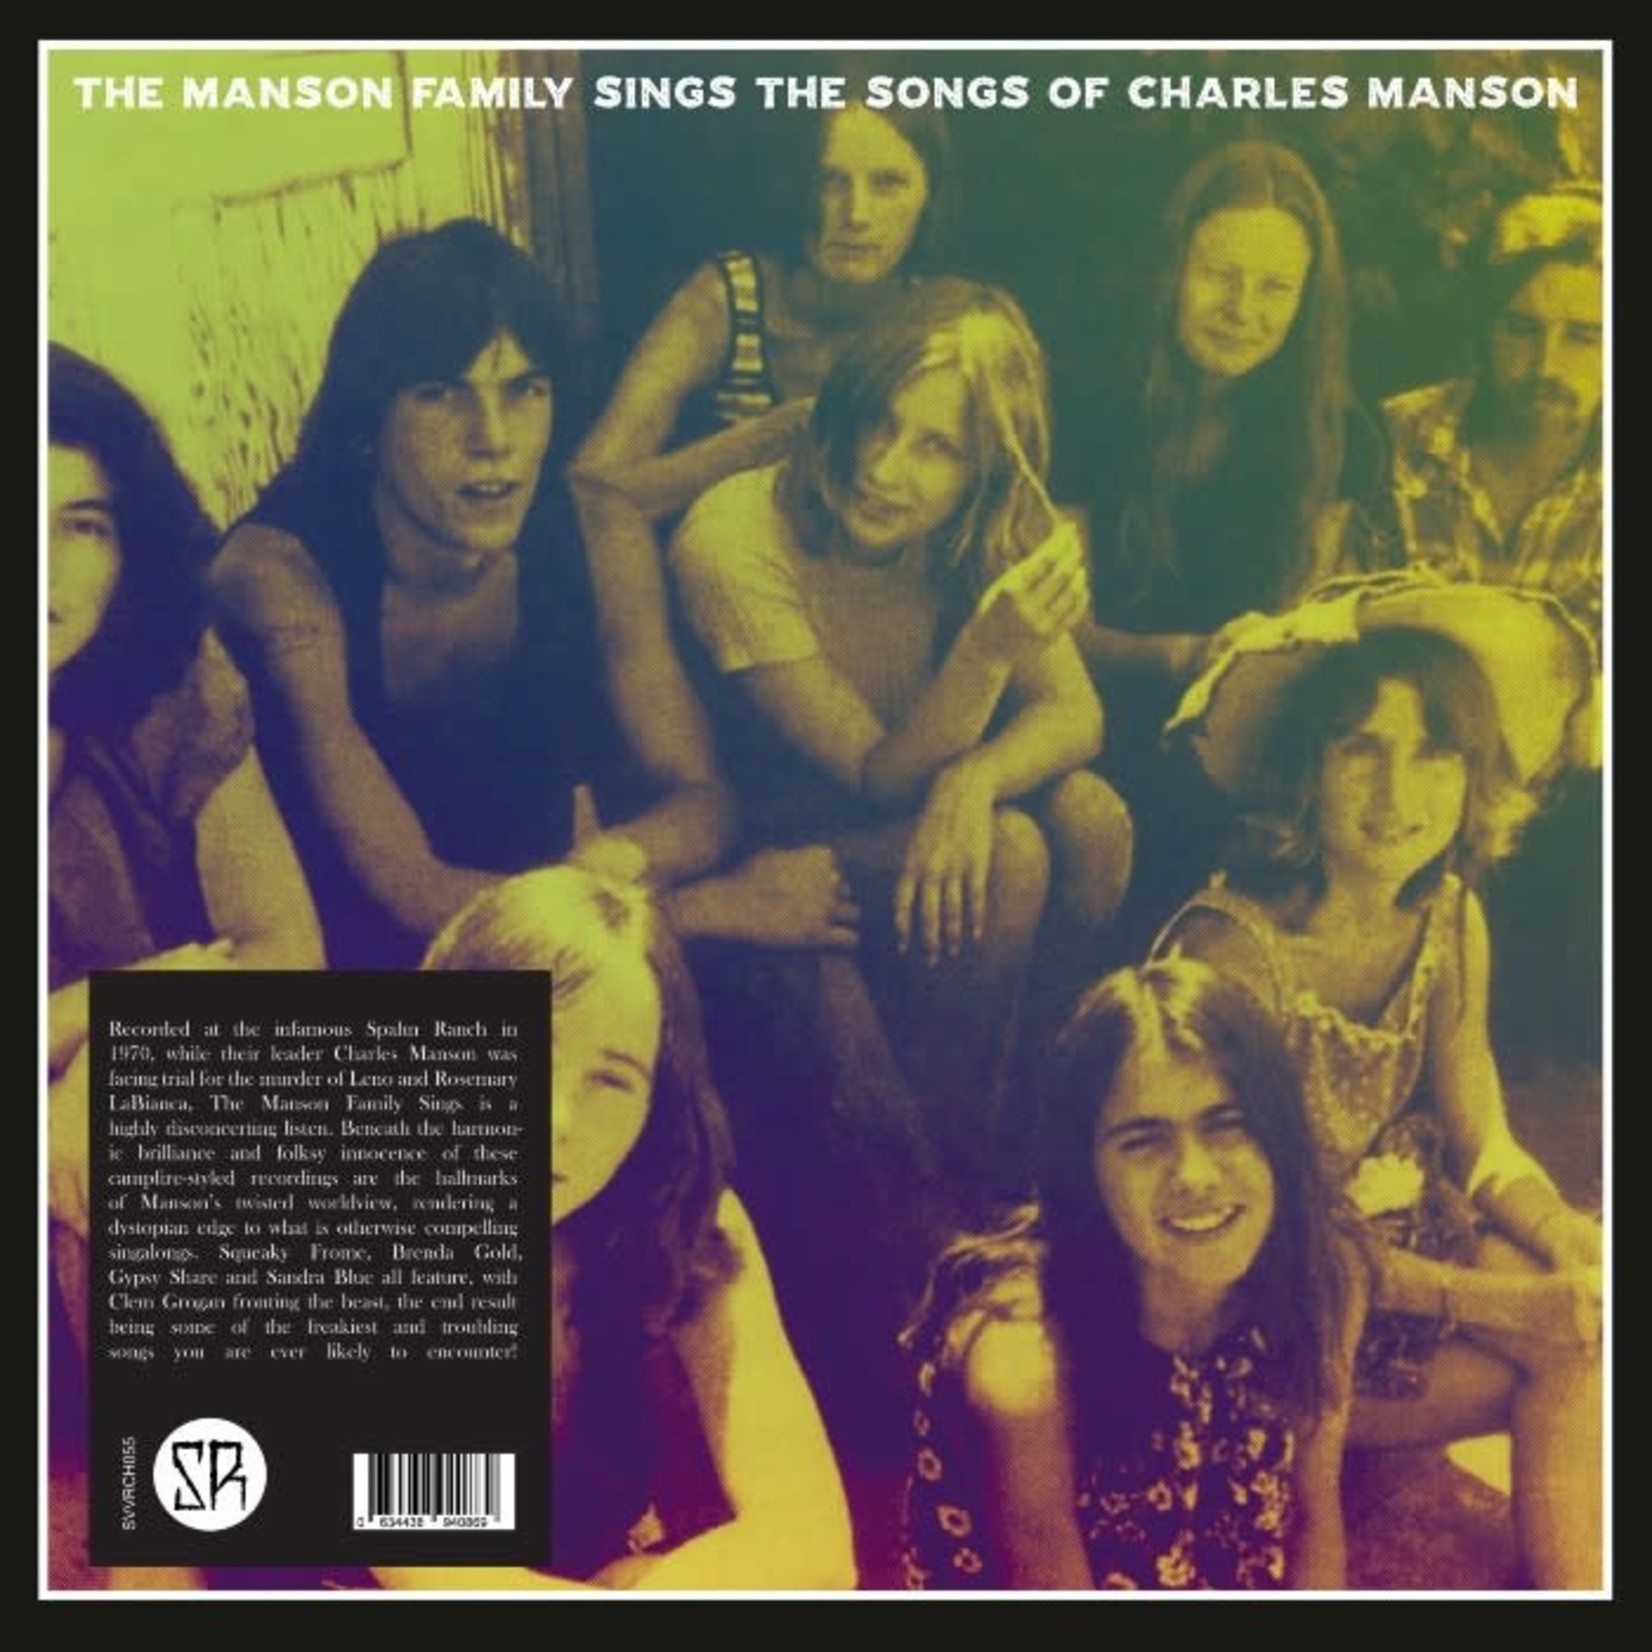 [New] The Manson Family - Manson Family Sings The Songs Of Charles Manson